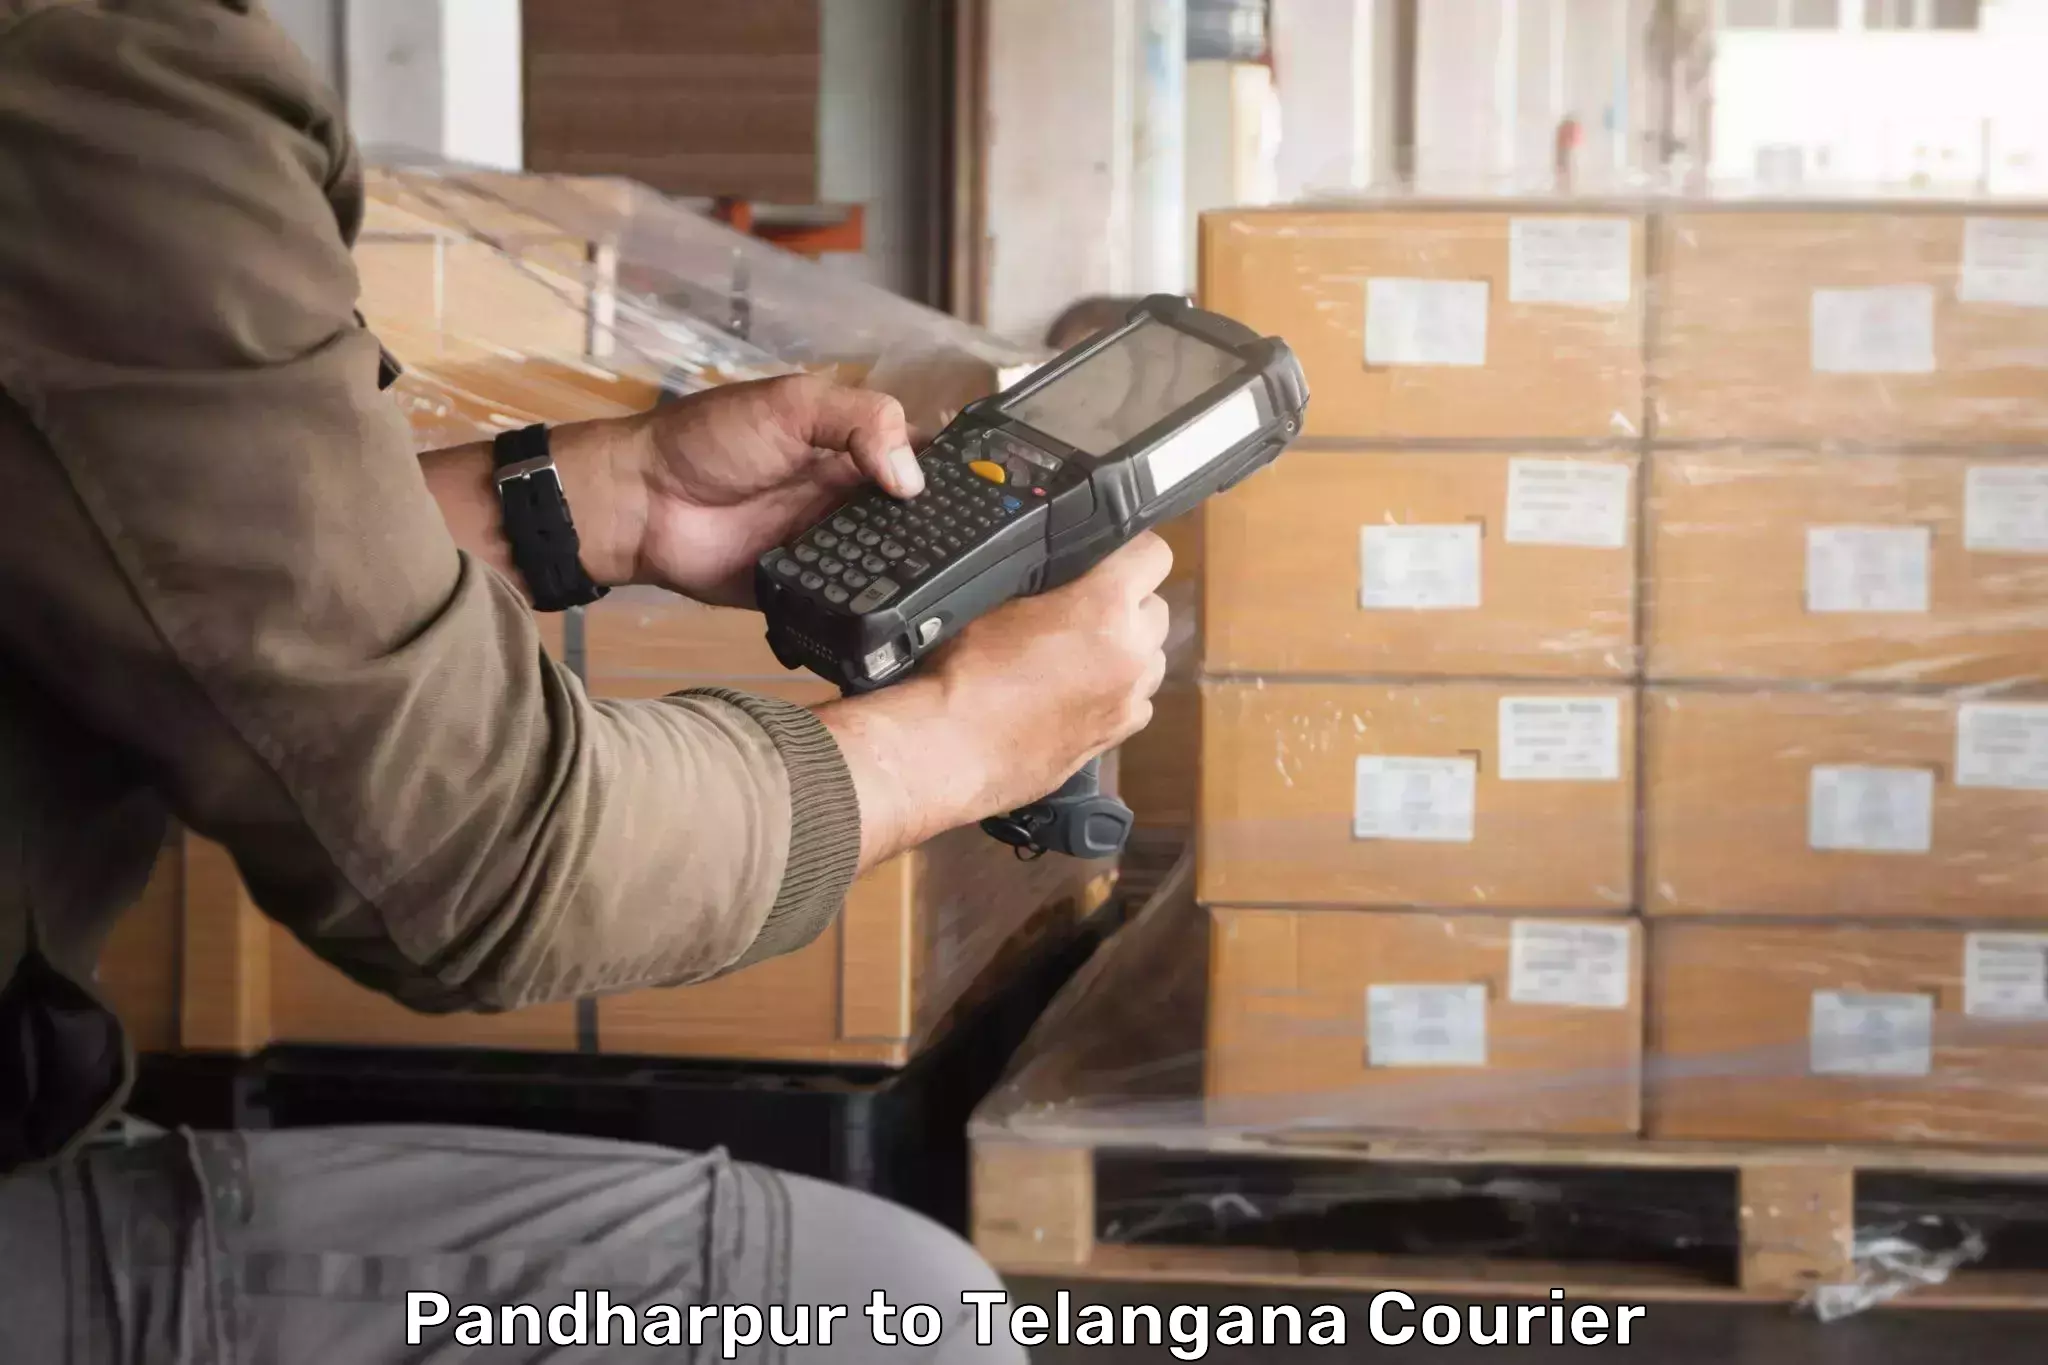 Full-service courier options in Pandharpur to Husnabad